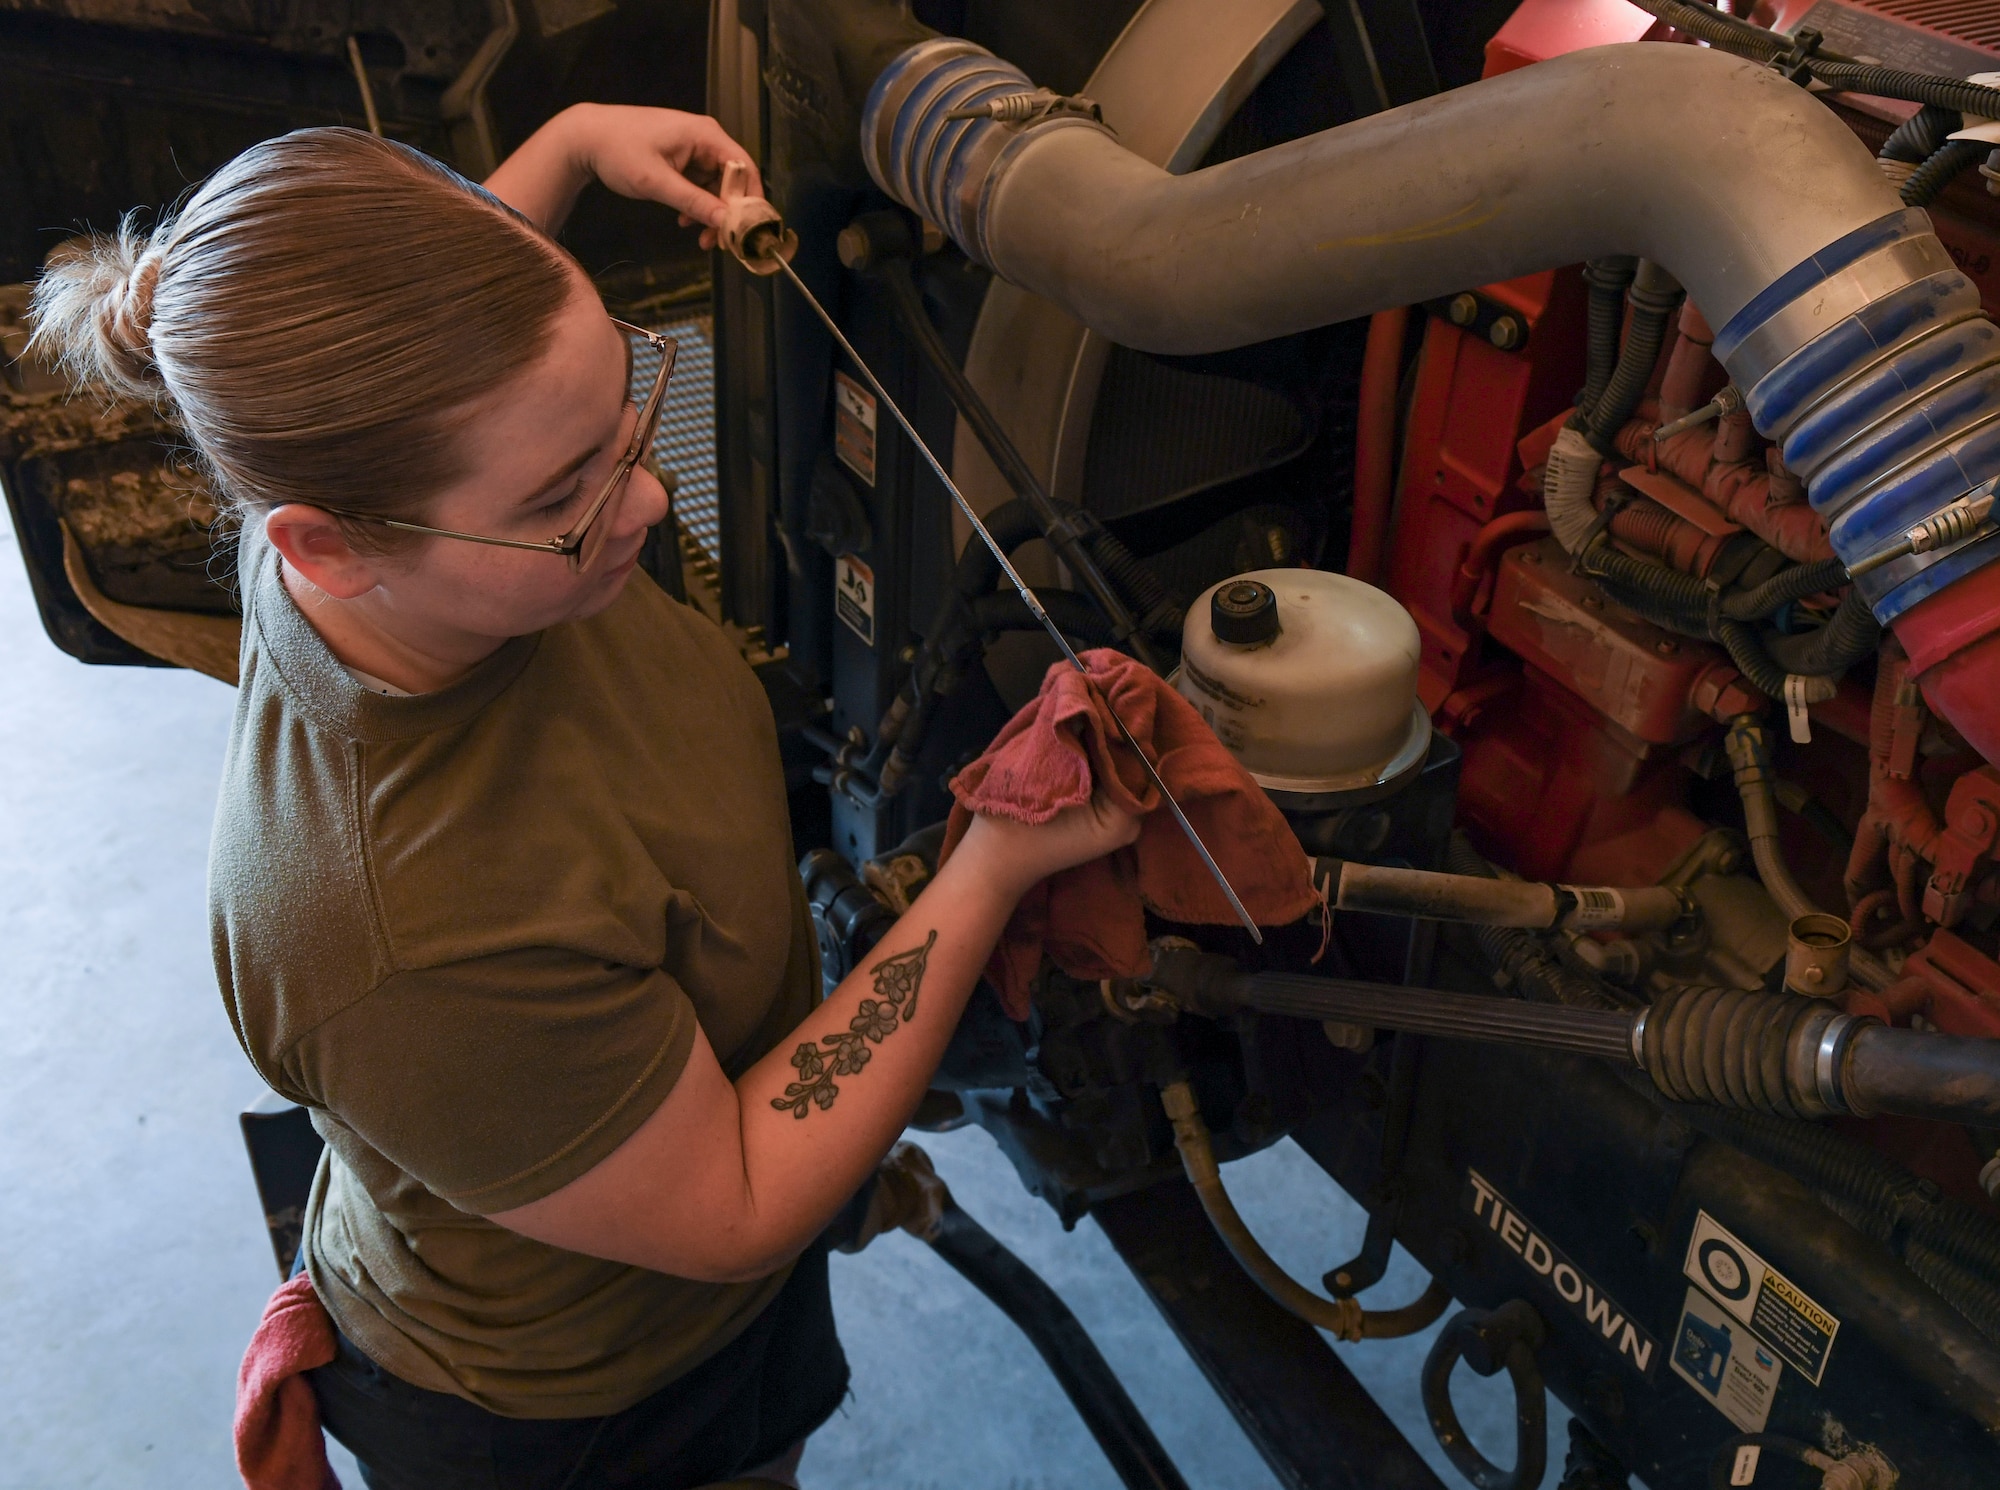 U.S. Air Force Senior Airman Hailee O’Leary, 407th Expeditionary Support Squadron logistics readiness flight refueling maintenance journeyman, checks the oil on a truck at Ahmed Al Jaber Air Base, Kuwait, Nov. 6, 2020.